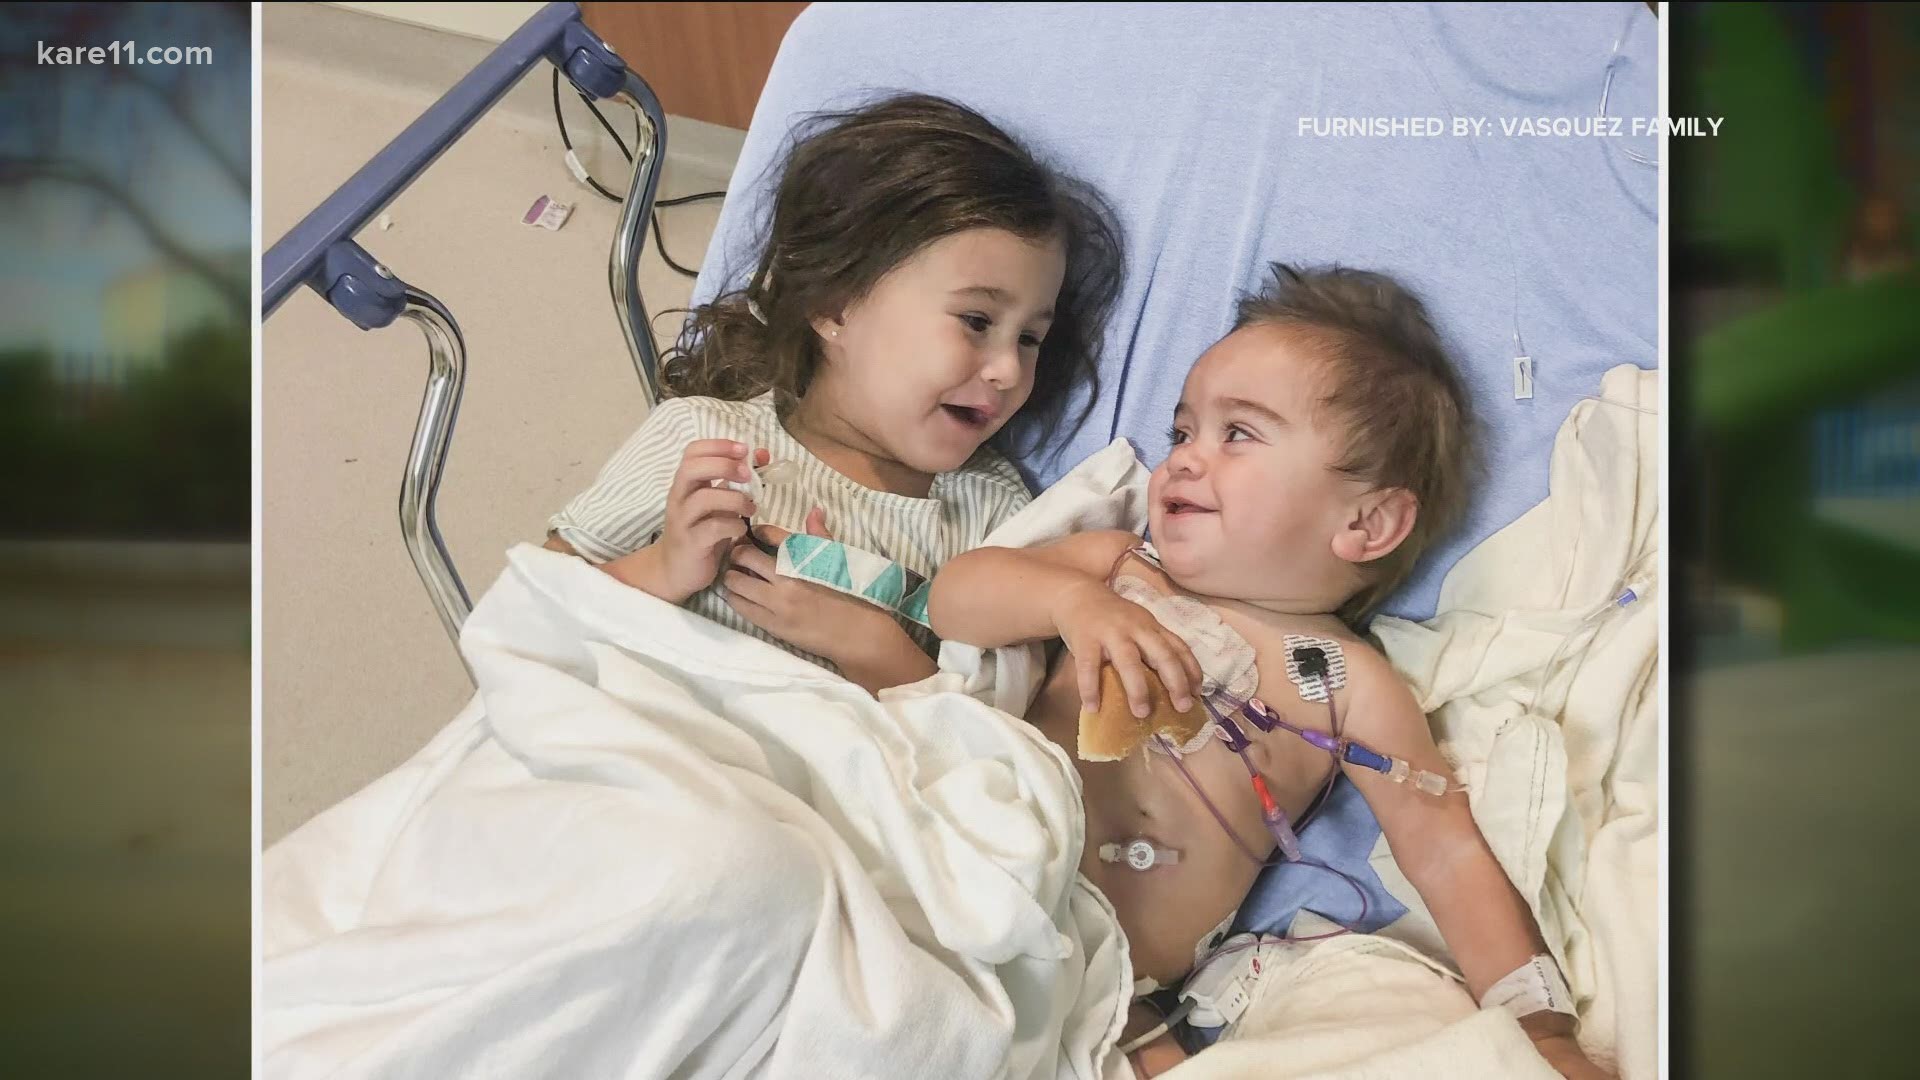 A young boy diagnosed with a rare genetic disorder was in need of a donor last year for a bone marrow transplant. That was when his big sister answered the call.